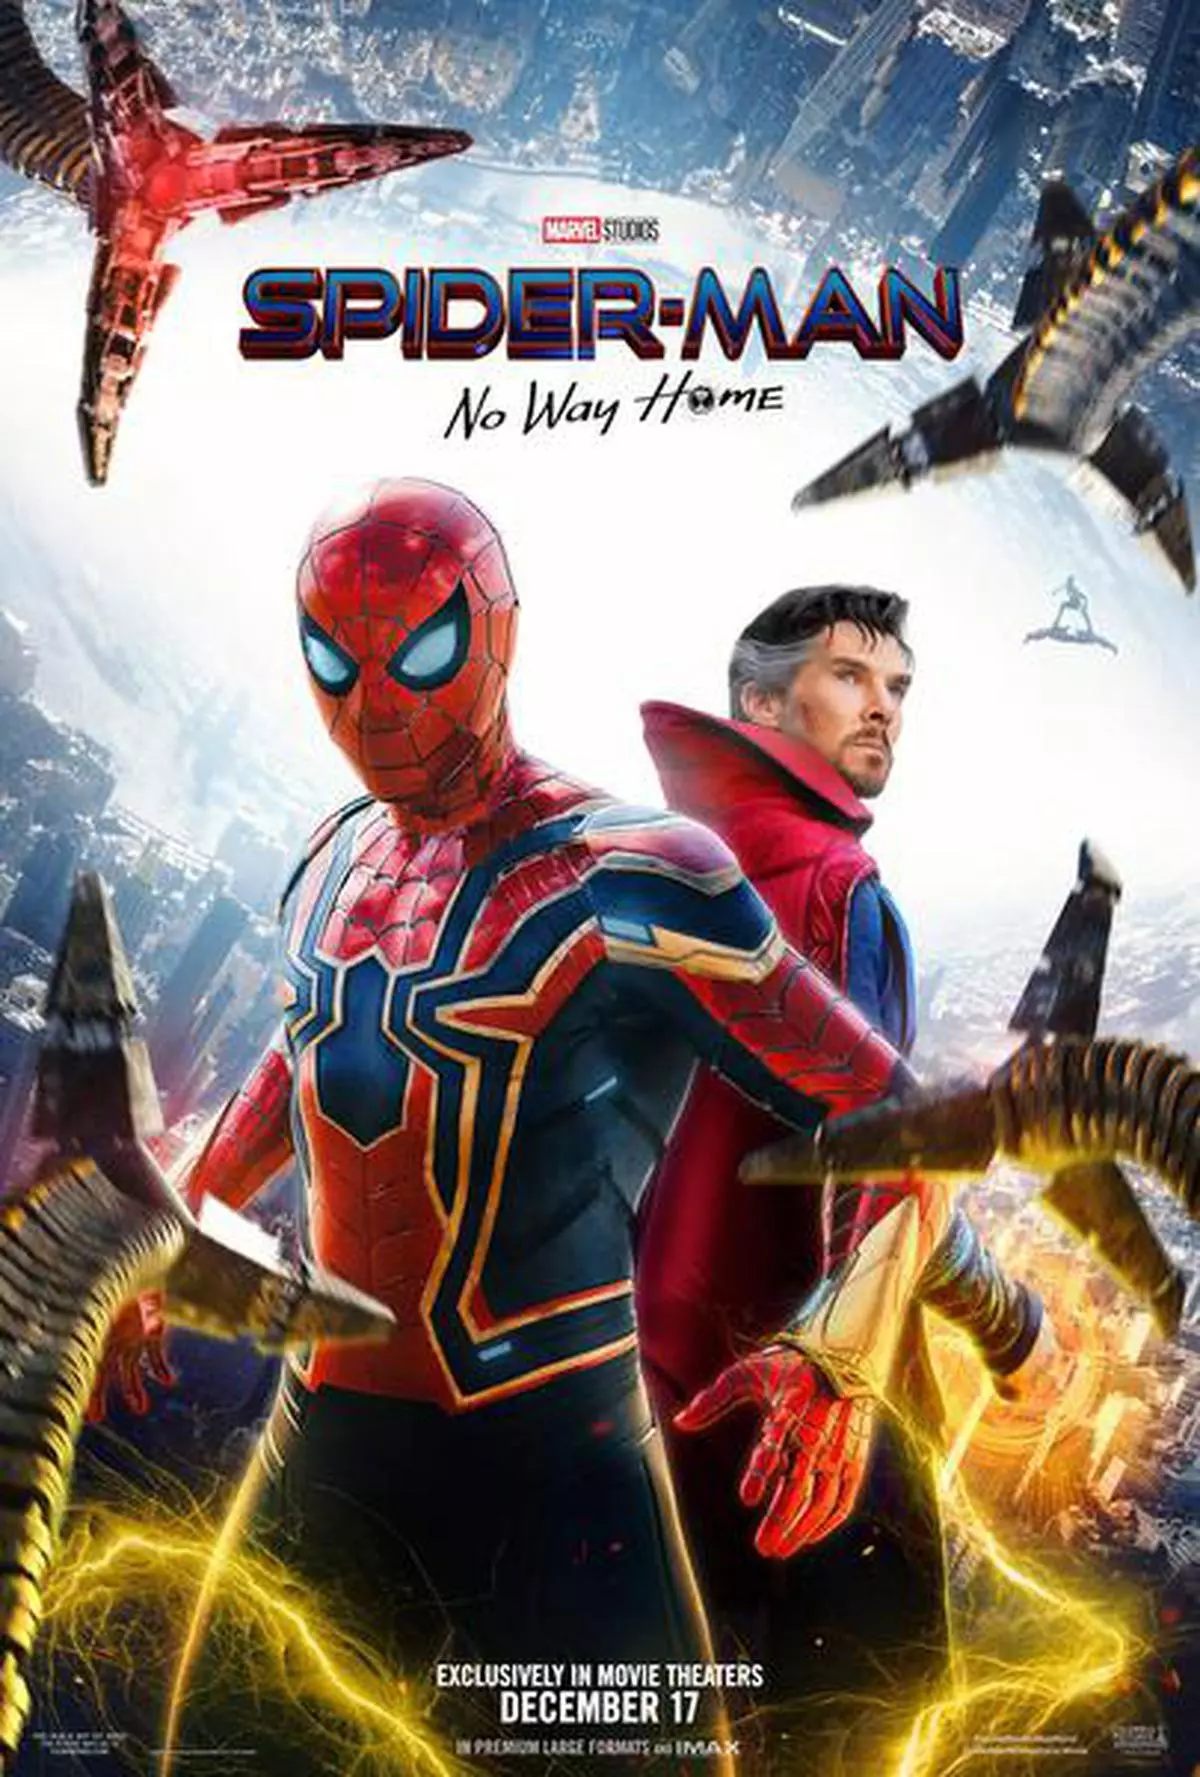 Spider-Man: No Way Home Review | The webslinger entertains in an epic scale  - The Hindu BusinessLine